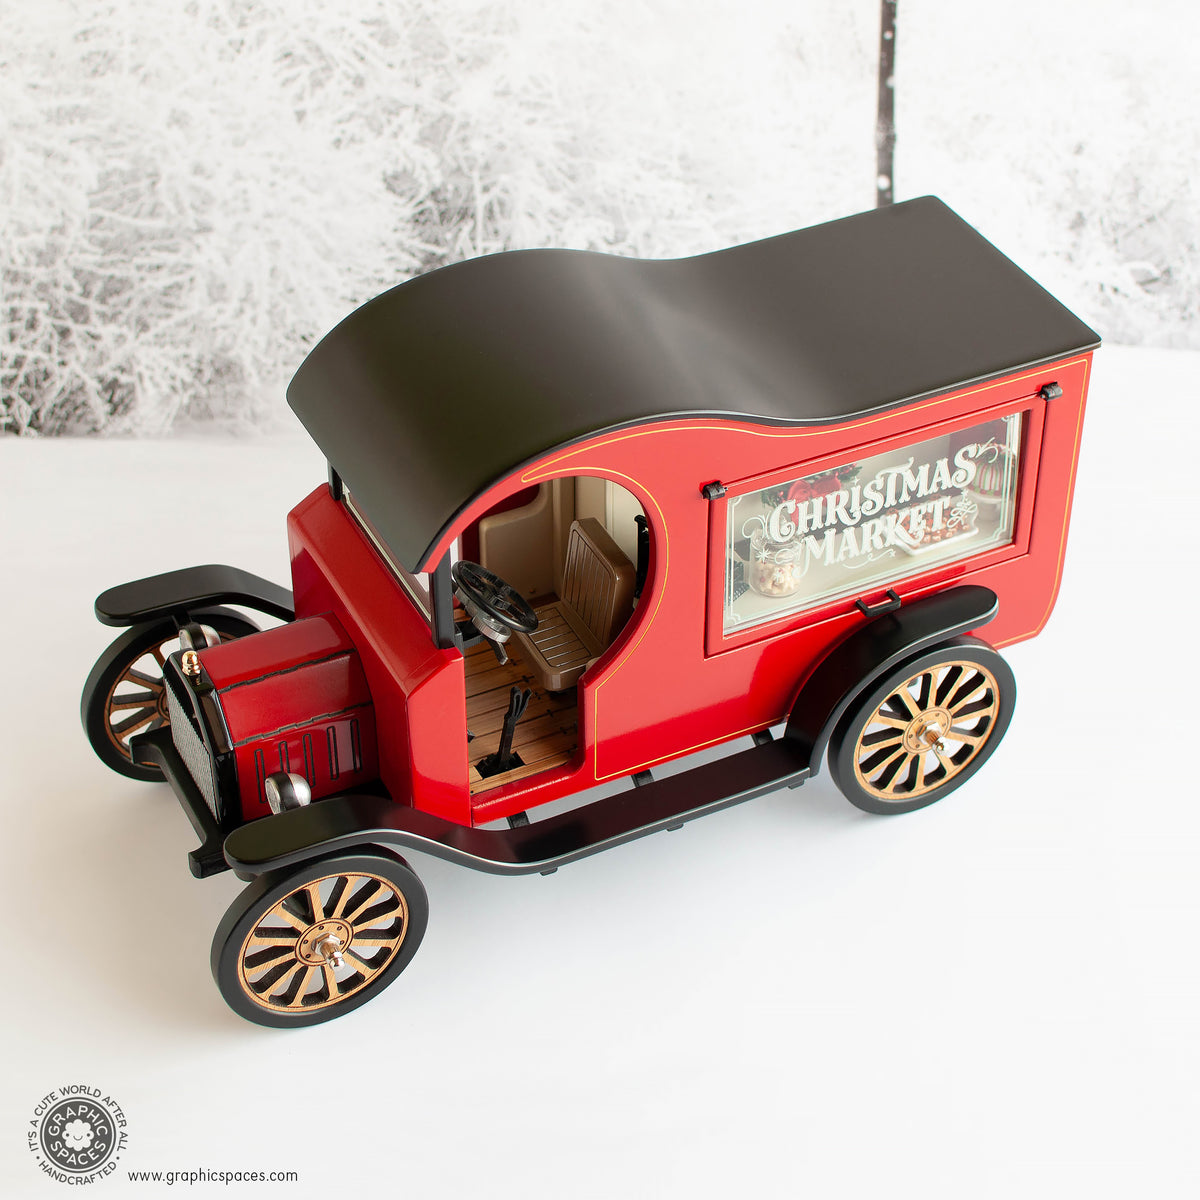 1:12 Scale Room Box Red Christmas Market Truck Model T C Cab. Driver side overhead angle view with window, doors closed.